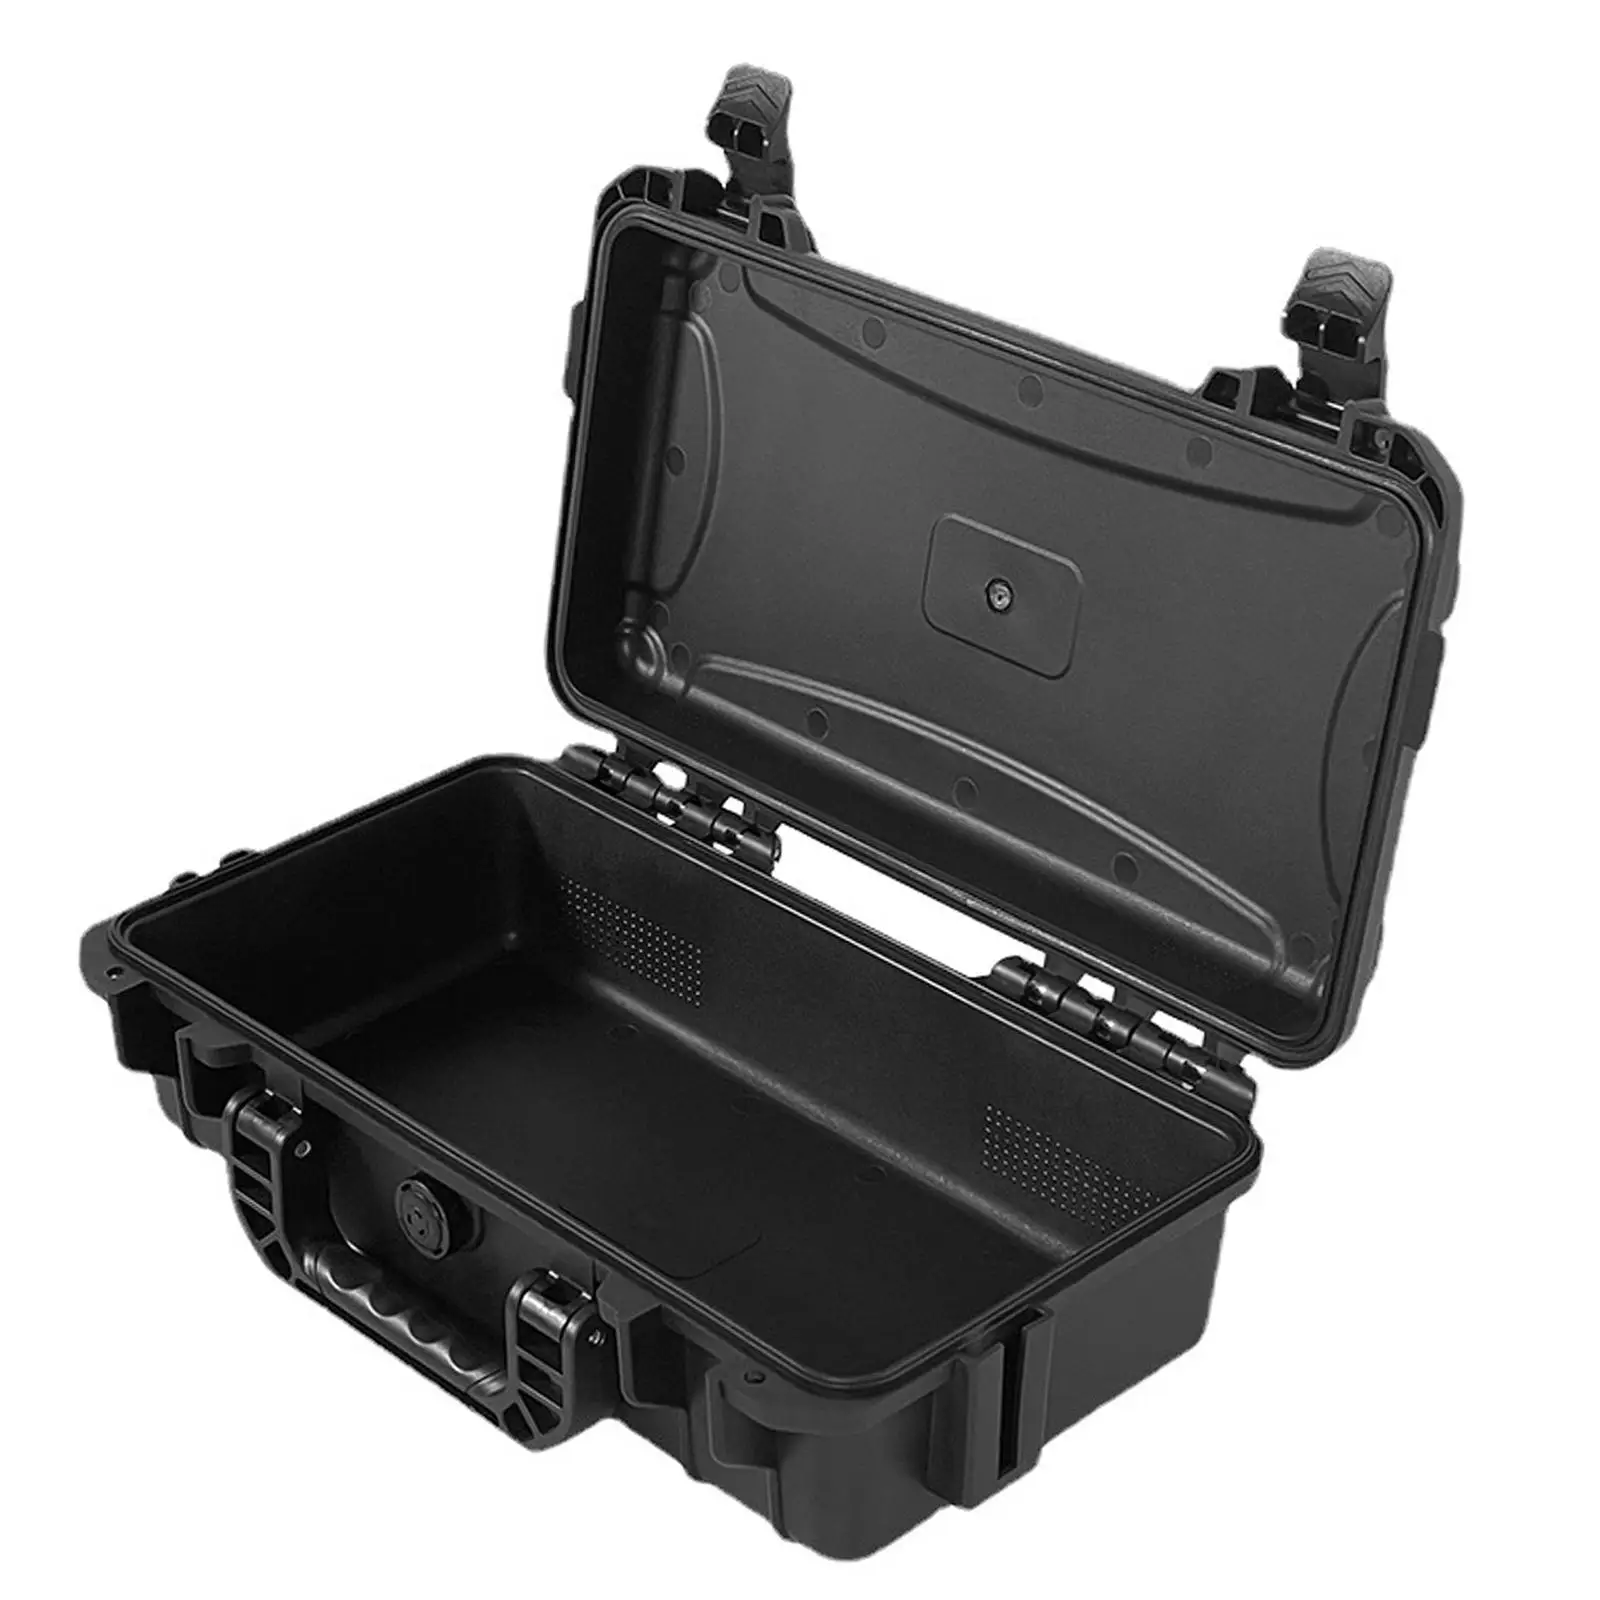 Outdoor Storage Case Outdoor Transport Case Shatterproof Tool Box Sealed Box for Electronics Travel Photographic Equipment Home